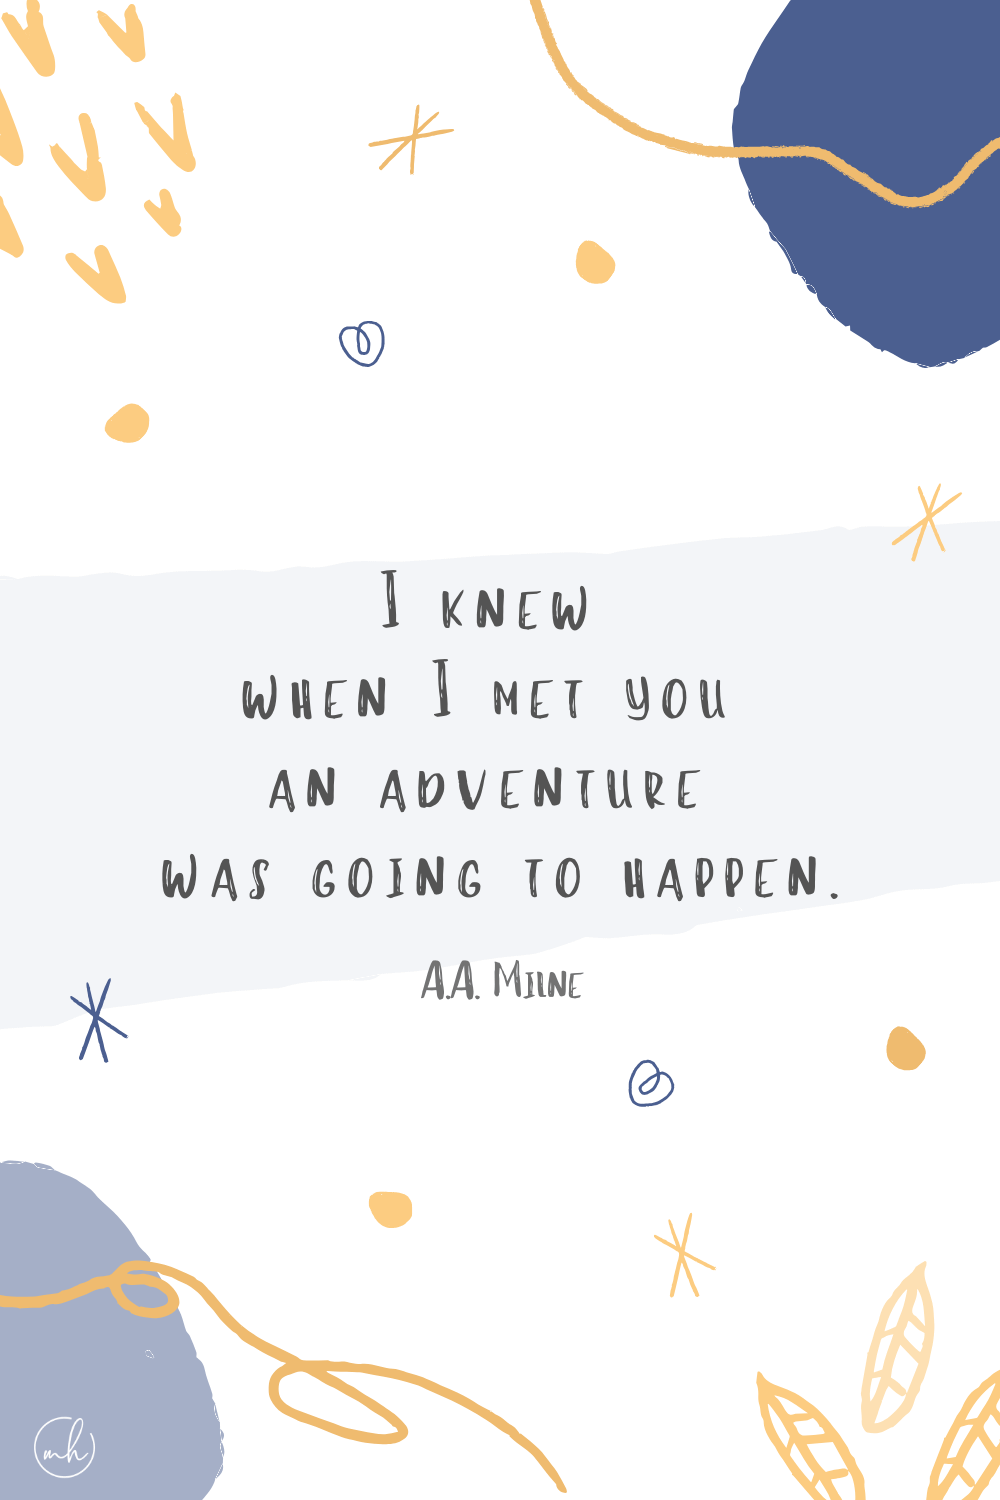 "I knew when I met you an adventure was going to happen.” —A.A. Milne